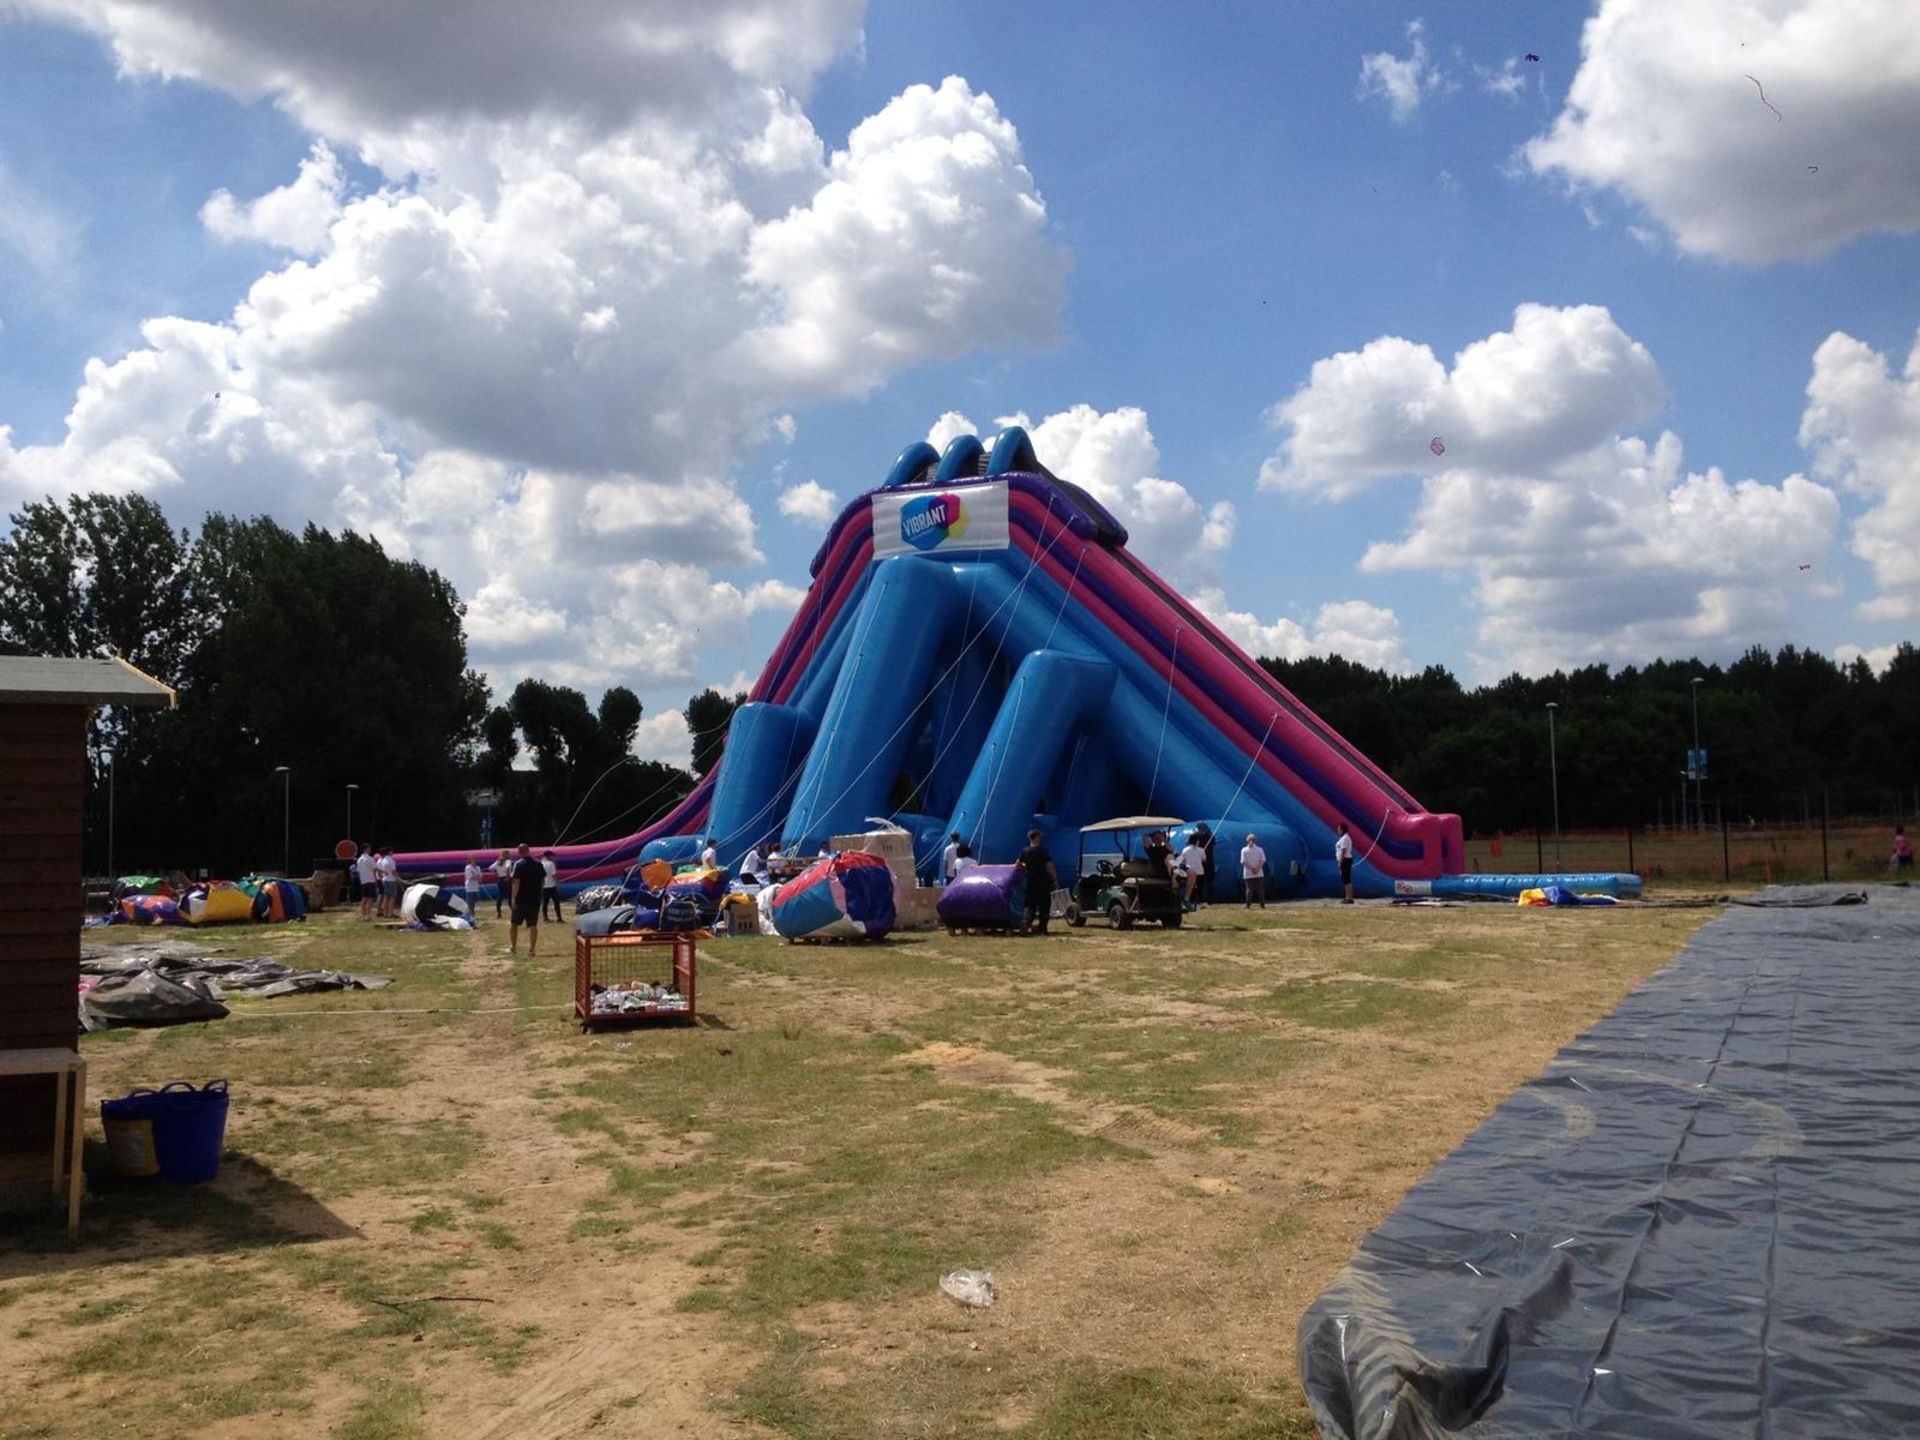 MEGA DESCENT INFLATABLE SLIDE . INCLUDES BLOWER. SOURCED FROM COUNCIL PROJECT. BELIEVED PURCHASED NE - Image 8 of 8